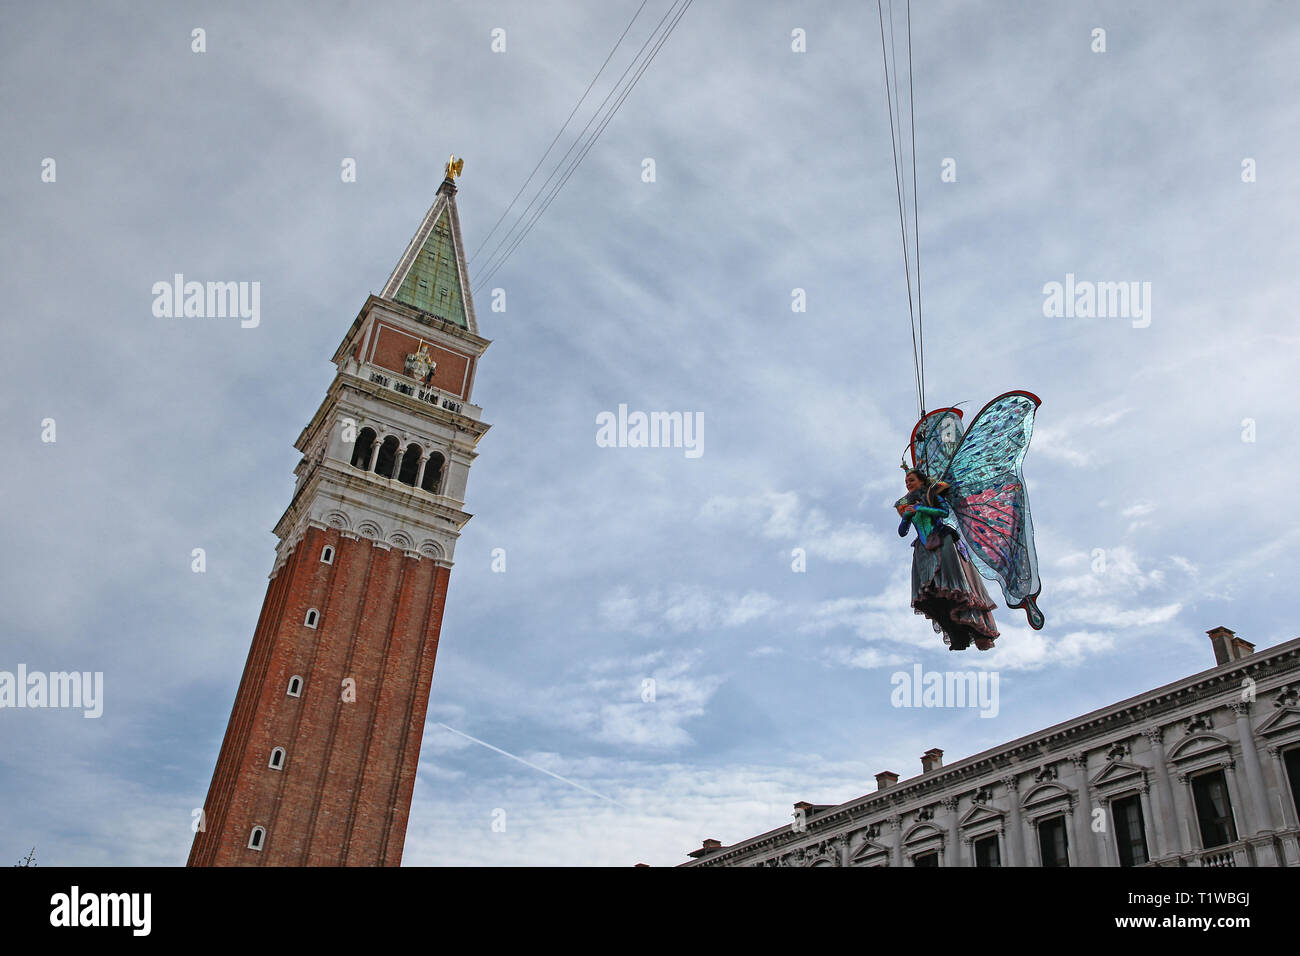 Flight of the Angel to Venice ahead of the Venice Carnival - Festa delle Marie in Venice  Where: Venice, Italy When: 16 Feb 2019 Credit: IPA/WENN.com  **Only available for publication in UK, USA, Germany, Austria, Switzerland** Stock Photo